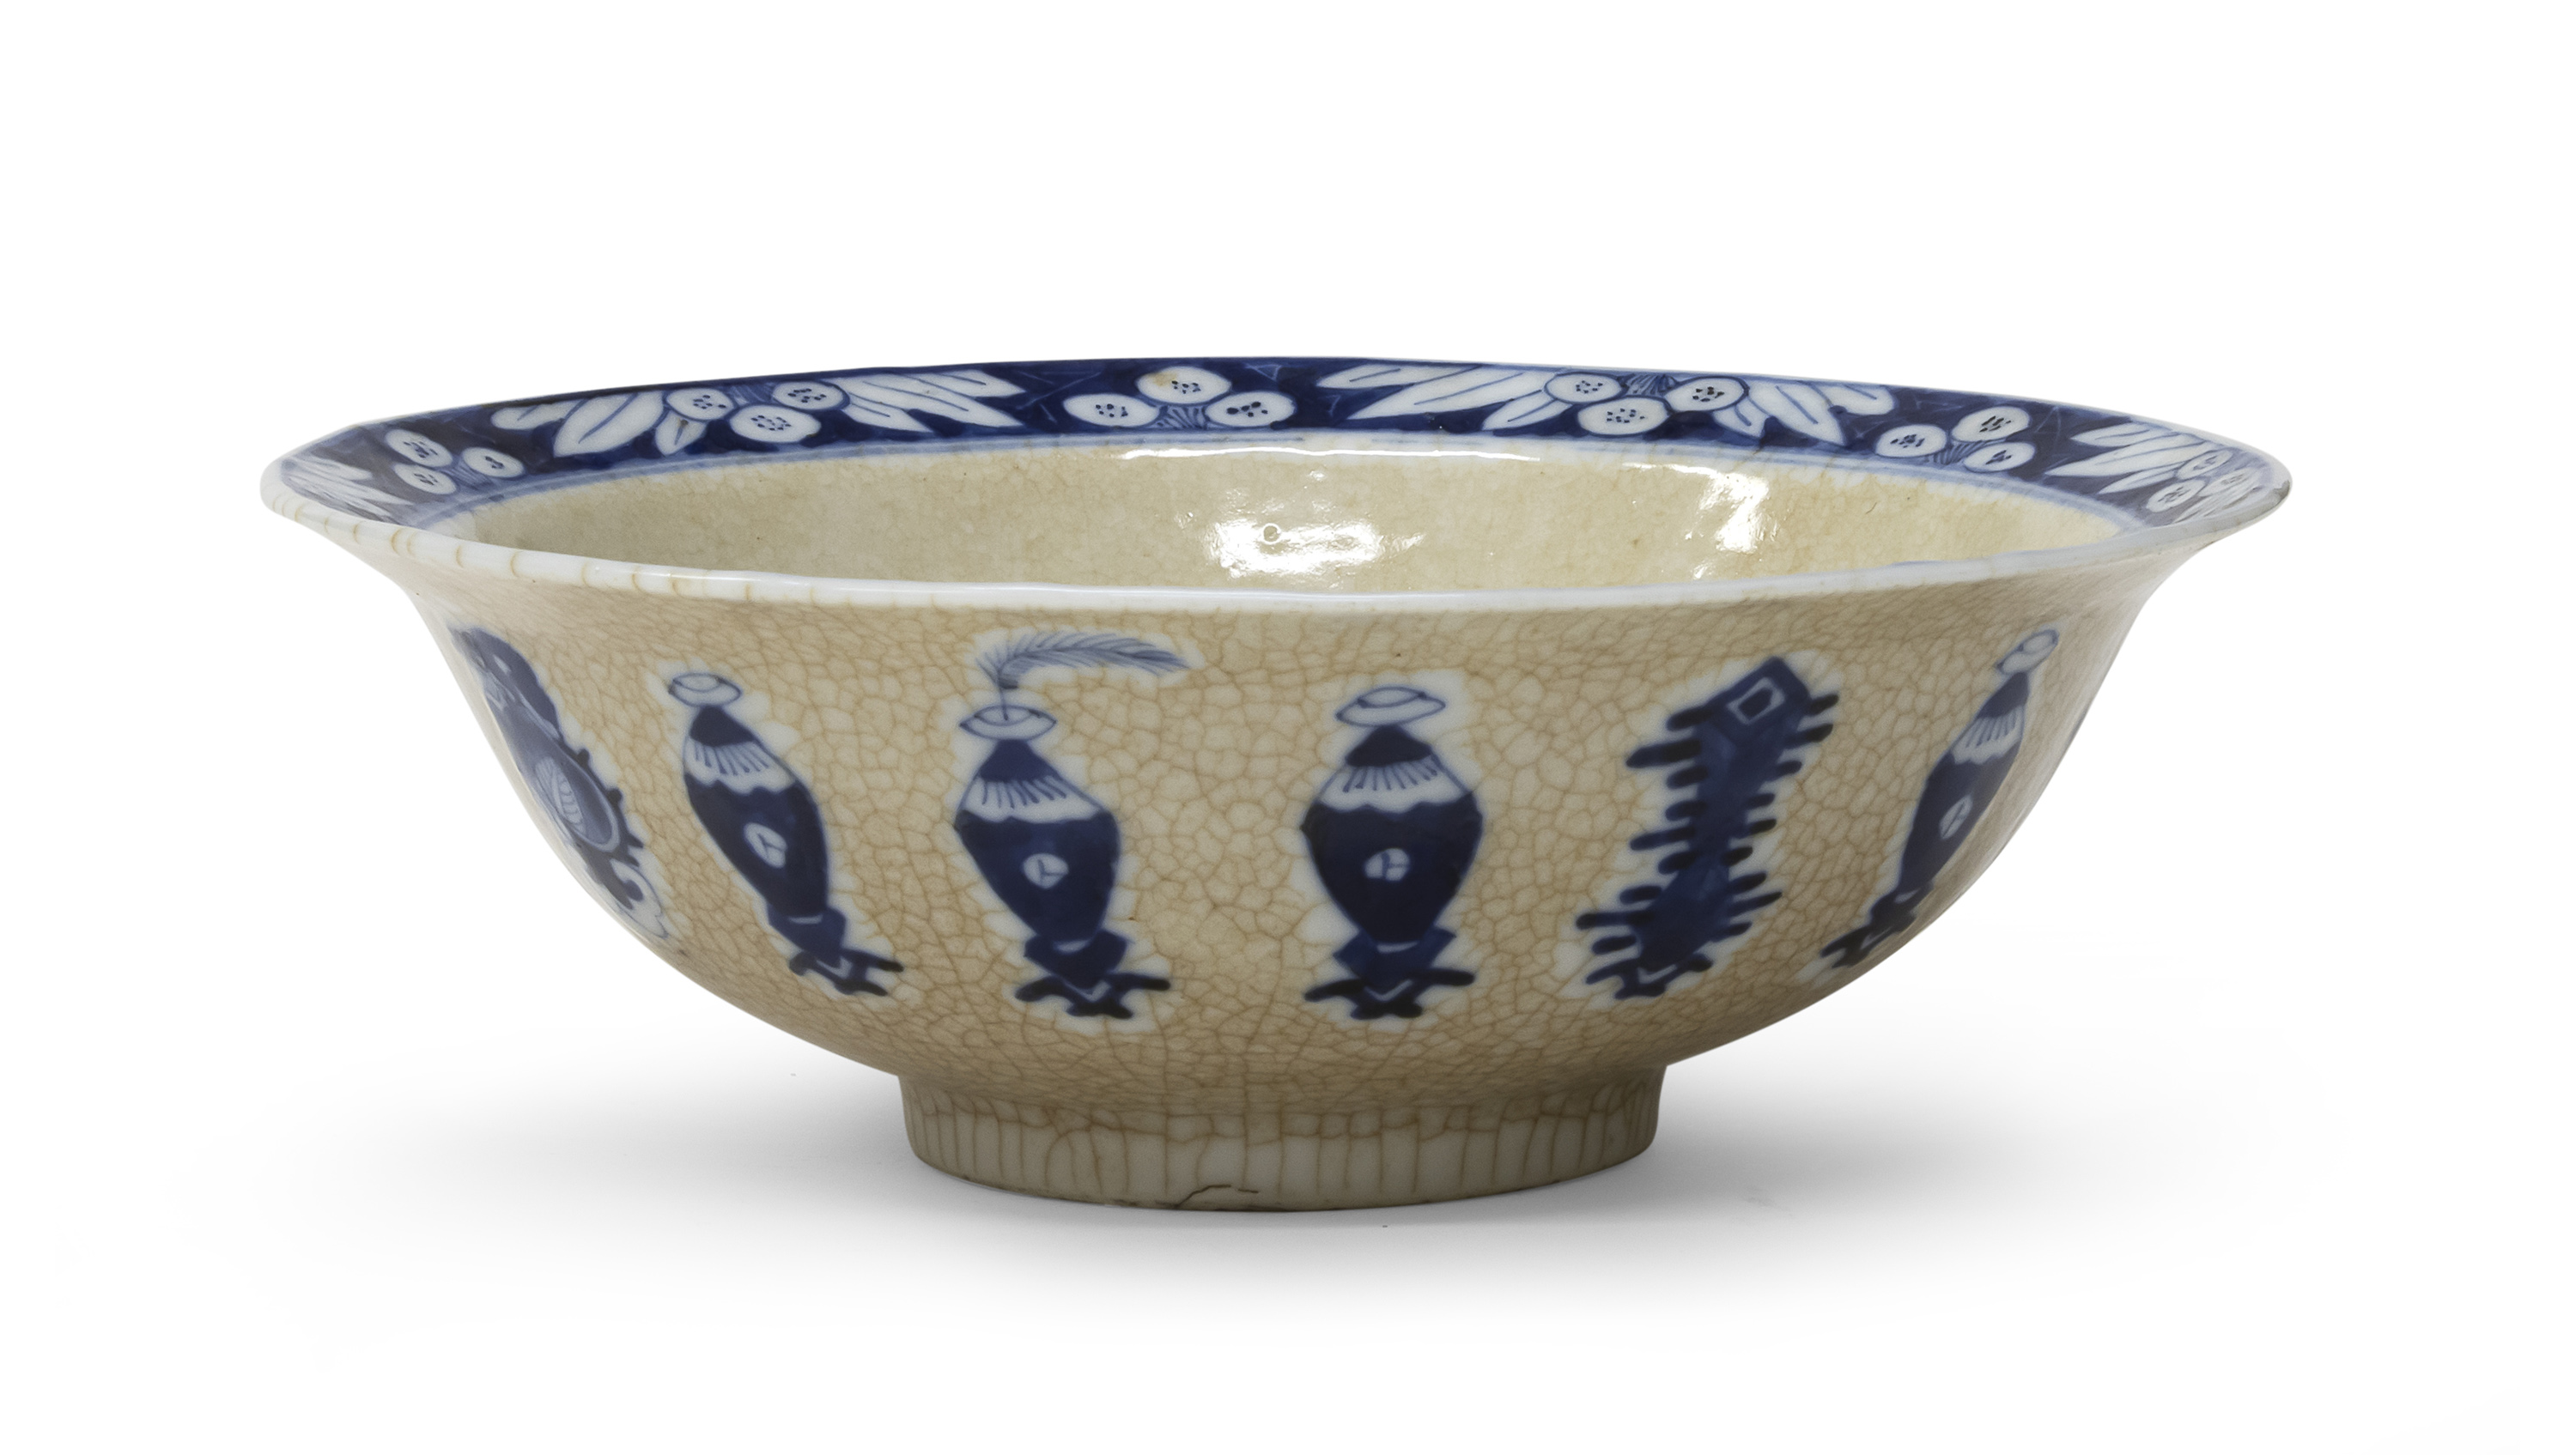 A CHINESE WHITE AND BLUE PORCELAIN BOWL. EARLY 20TH CENTURY.